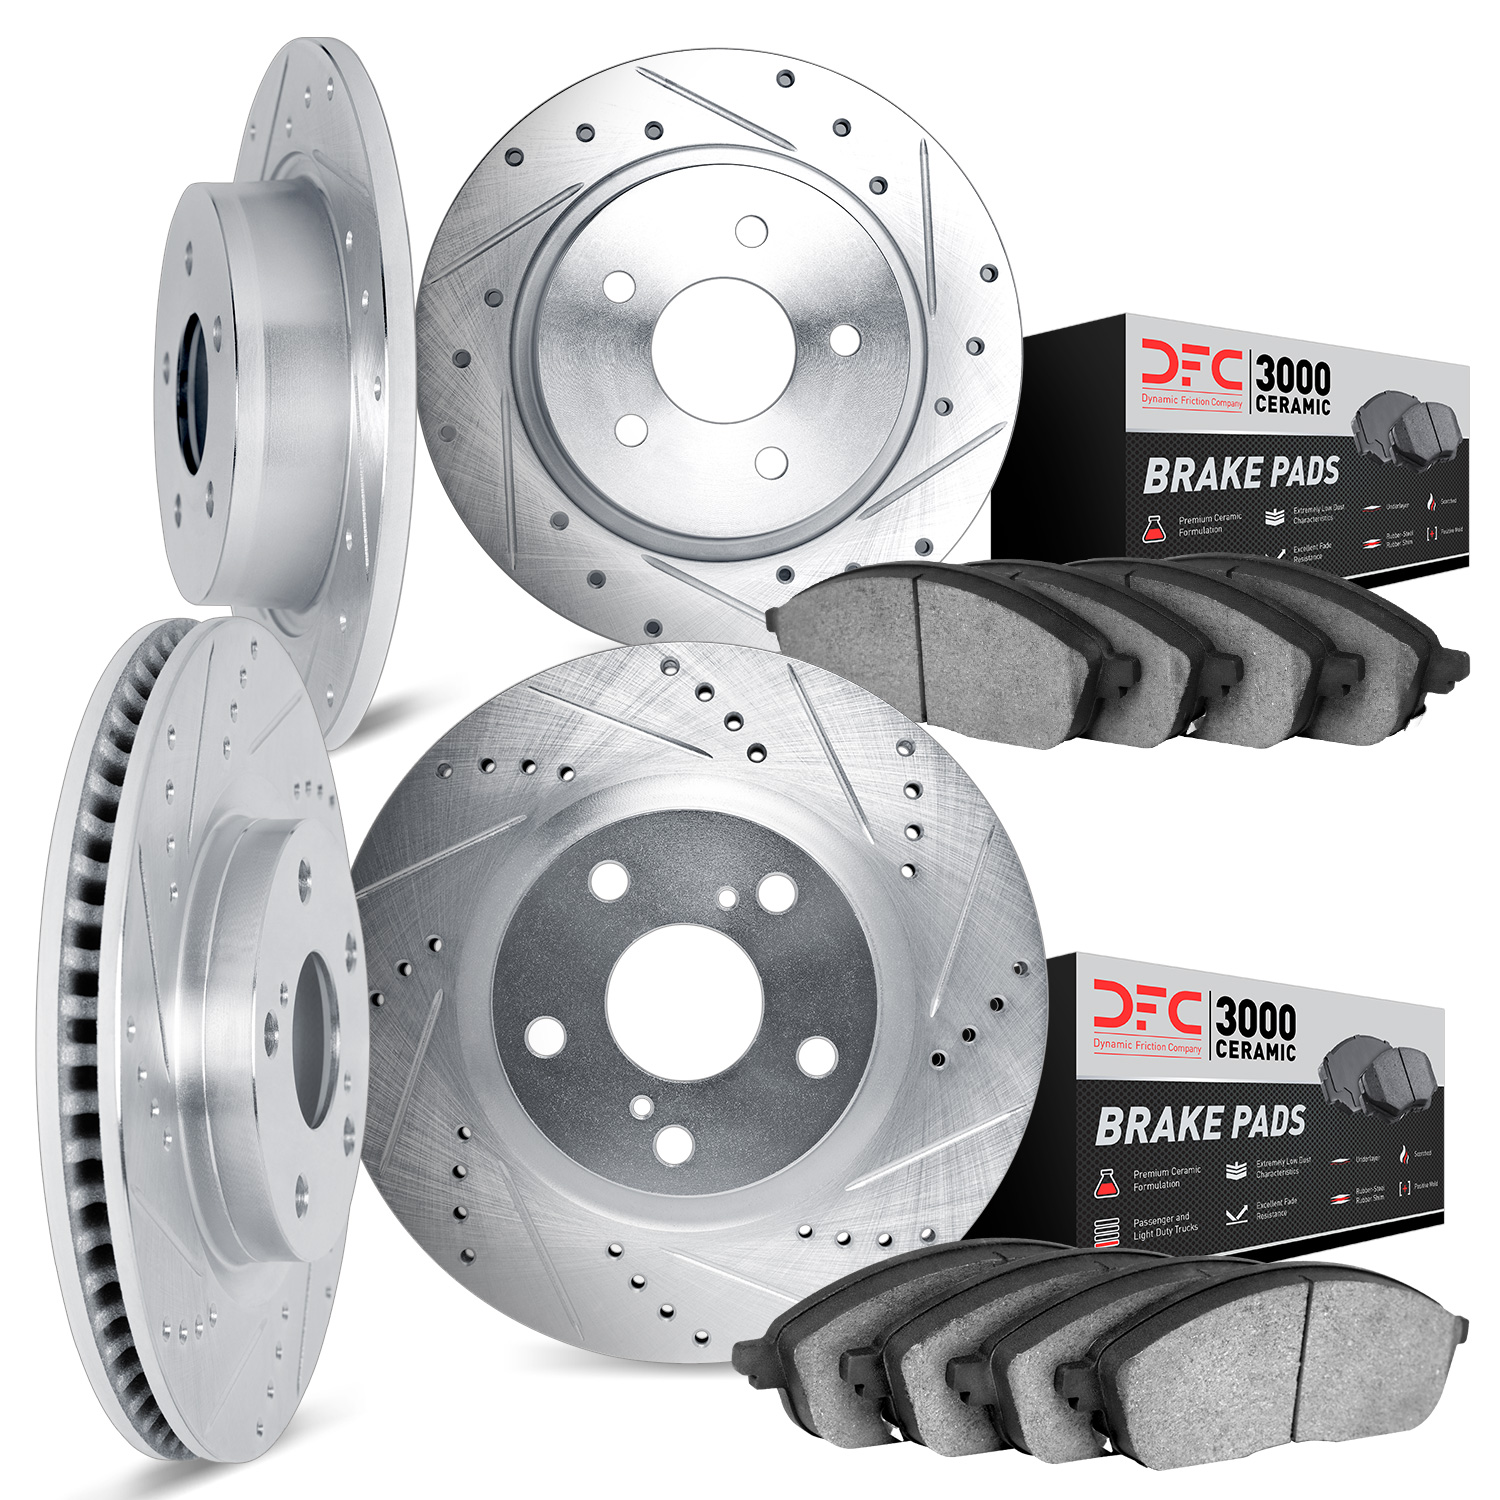 7304-54121 Drilled/Slotted Brake Rotor with 3000-Series Ceramic Brake Pads Kit [Silver], 2016-2018 Ford/Lincoln/Mercury/Mazda, P